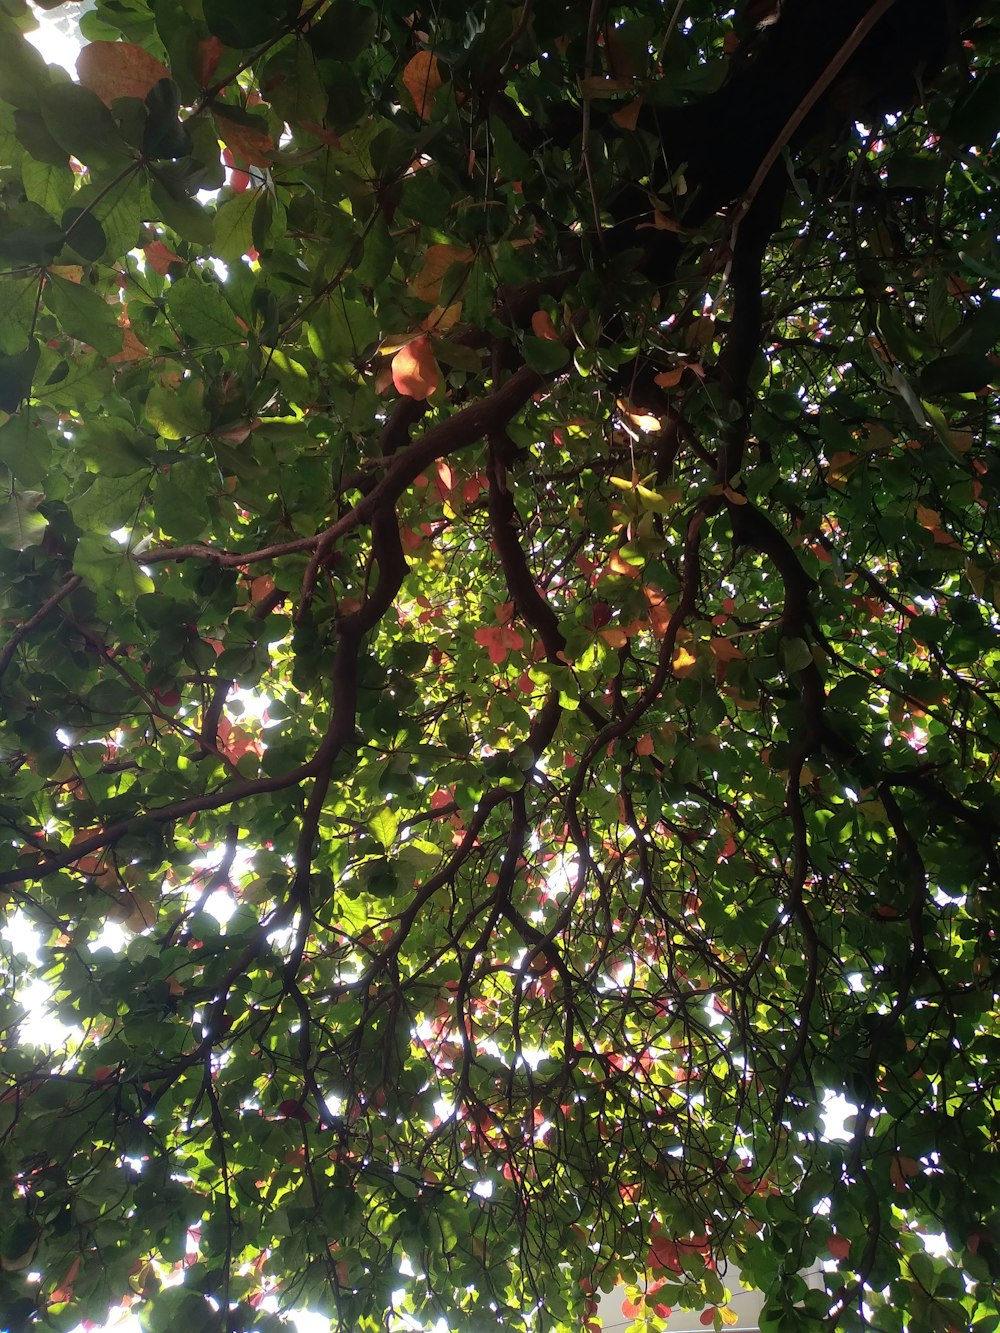 looking up at the leaves and branches of a tree